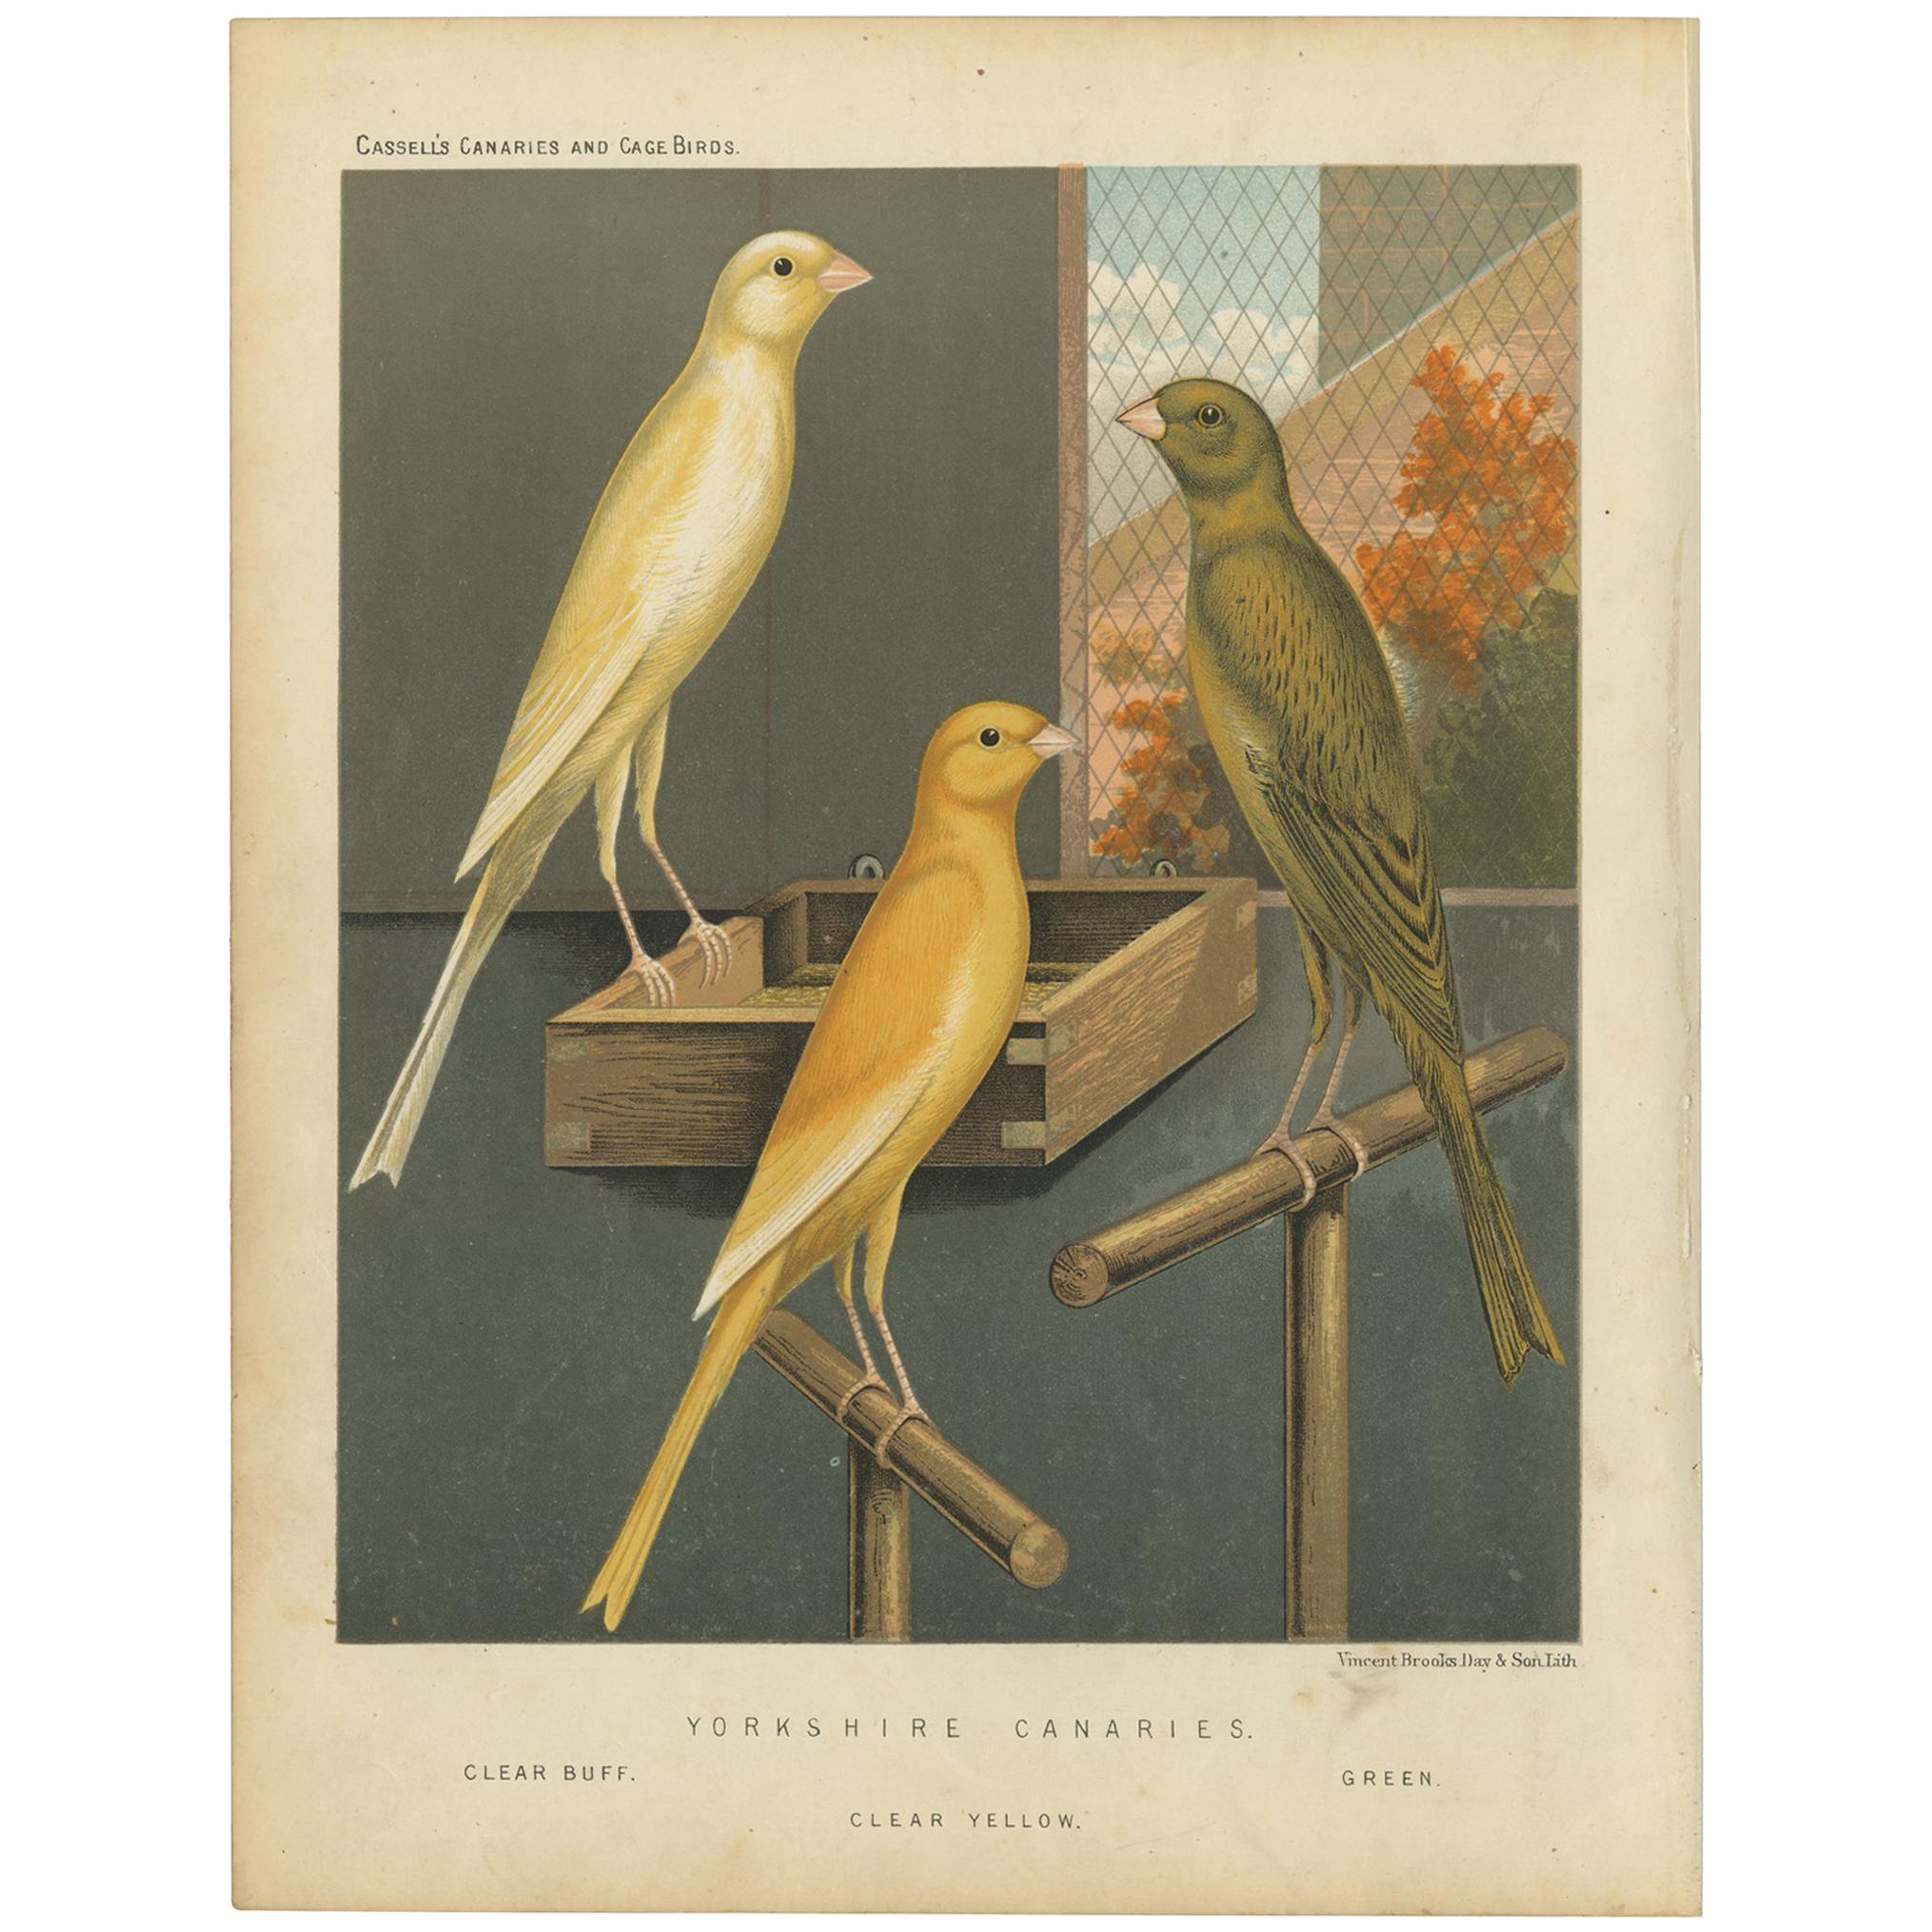 Antique Bird Print of the Yorkshire Canaries, Clear Buff, Clear Yellow and Other For Sale